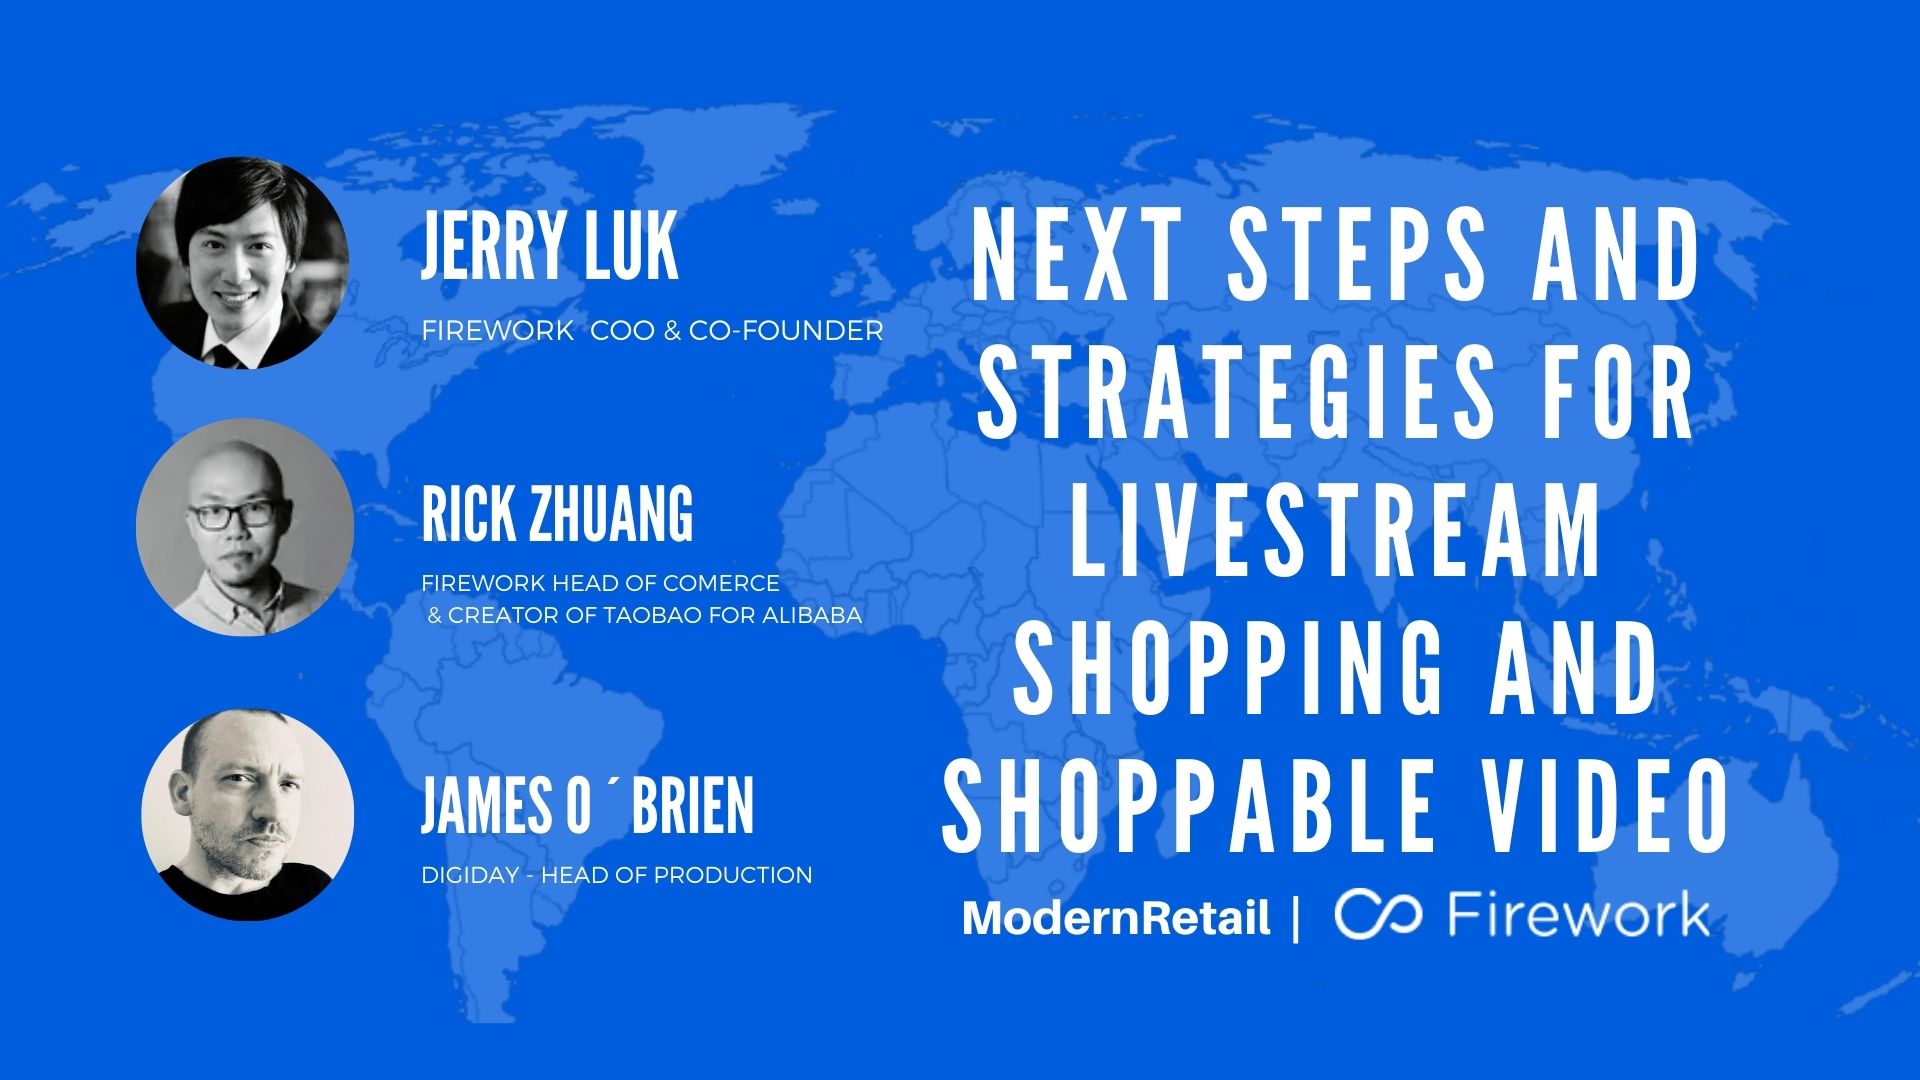 Next Steps and Strategies for Livestream Shopping and Shoppable Video 